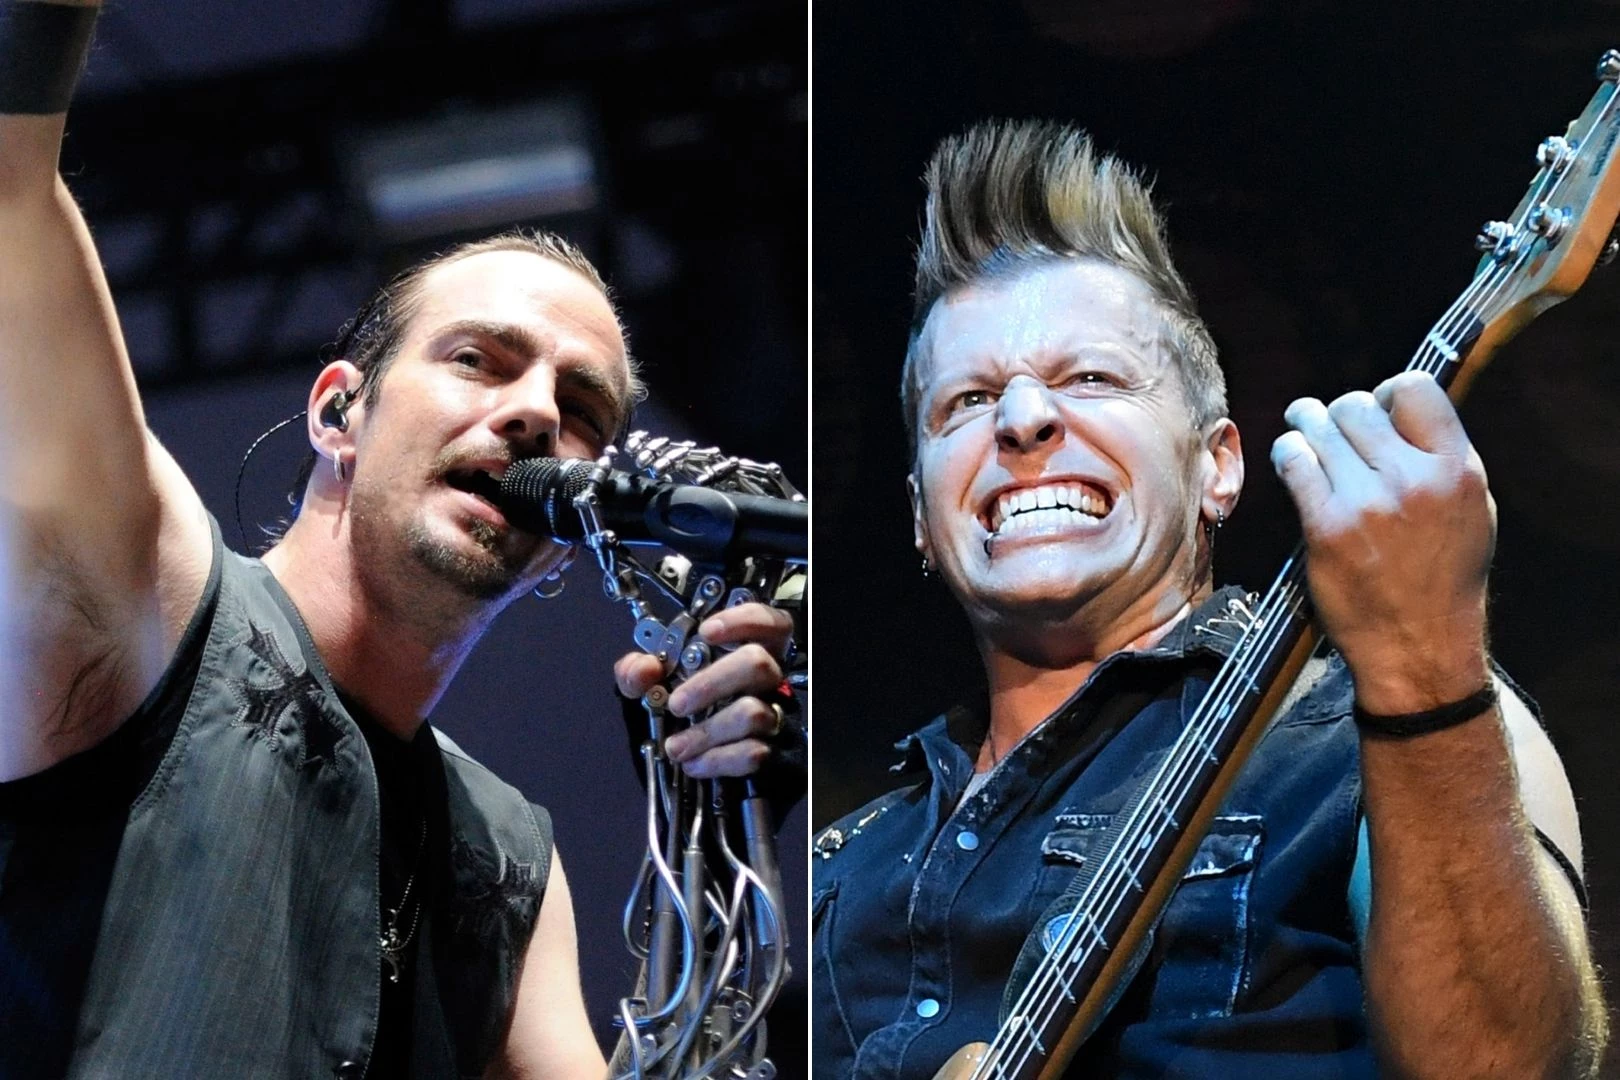 Three Days Grace + Ex-Singer Reconnect at High School Event